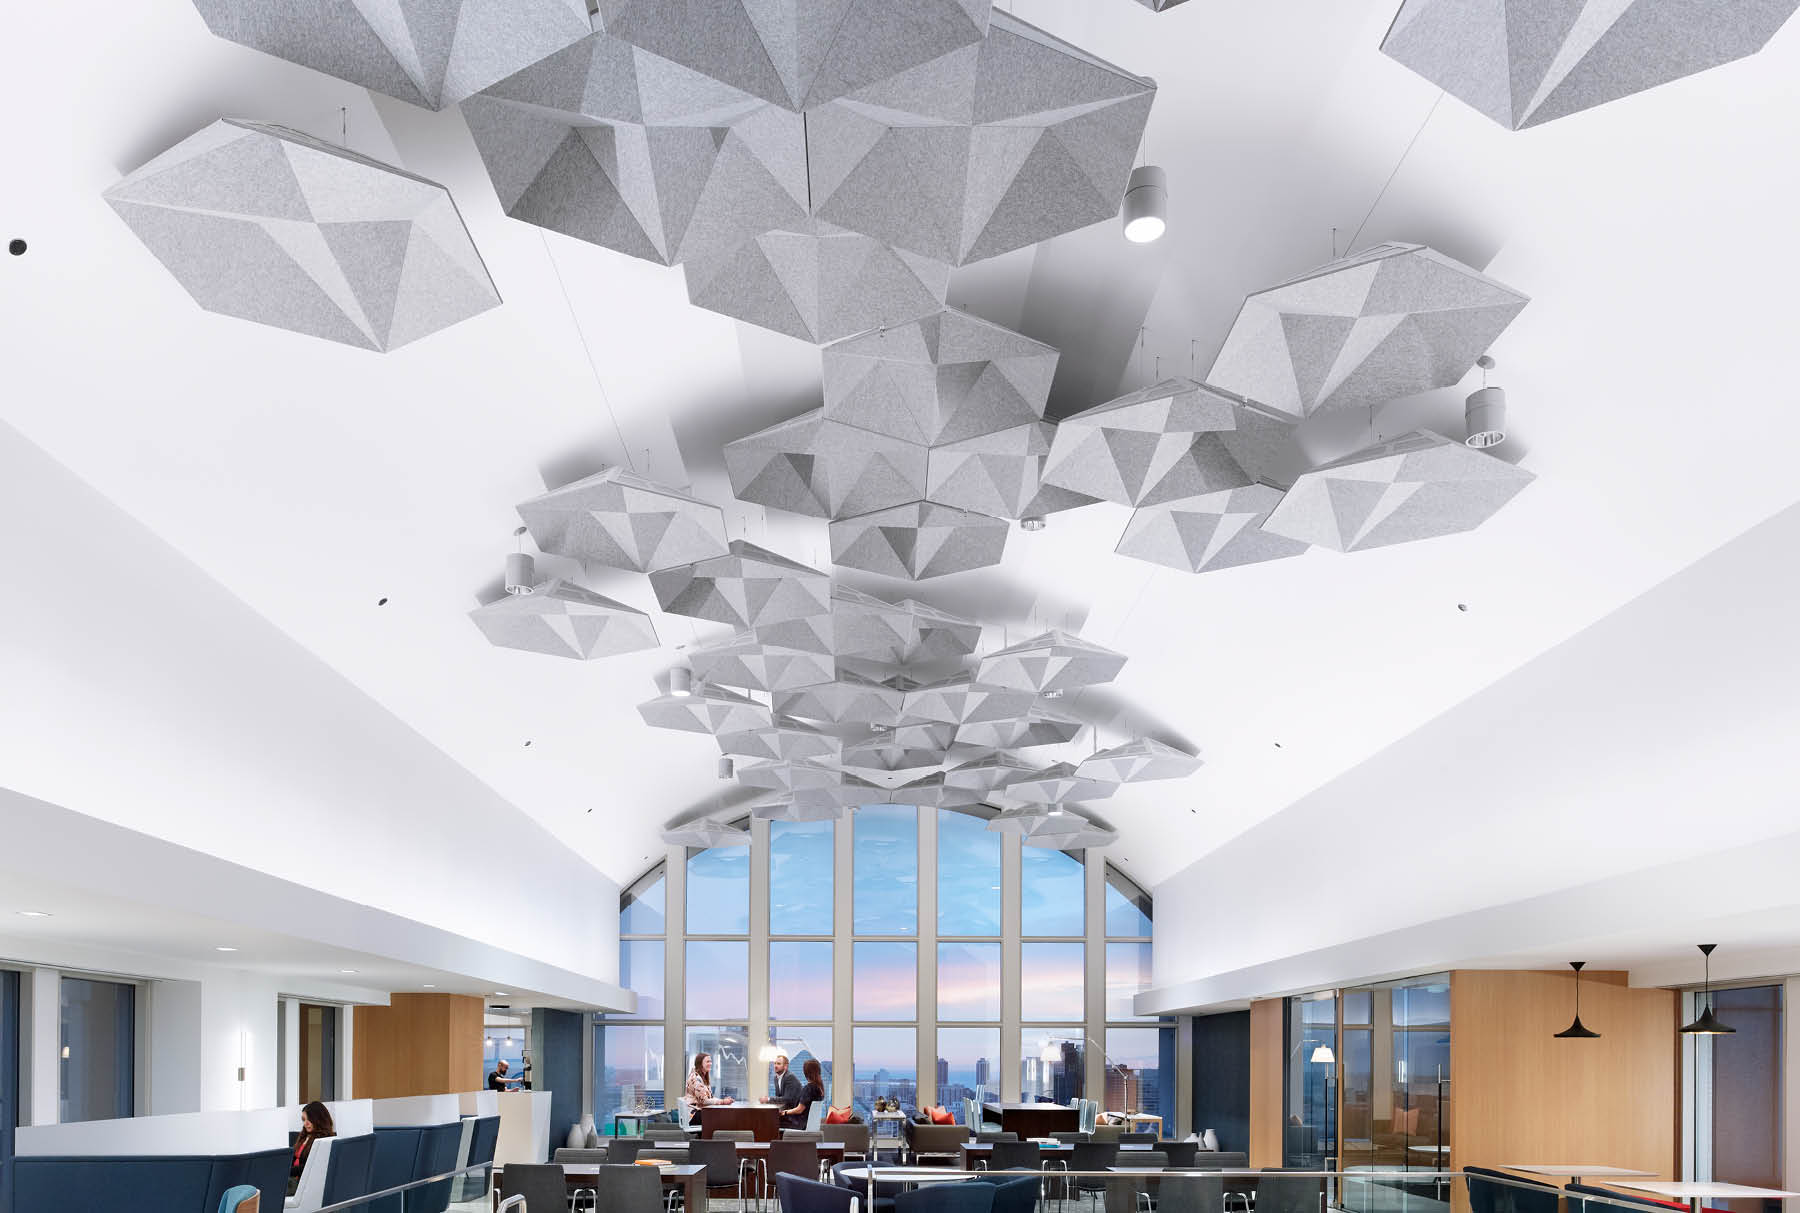 ceiling sound absorption